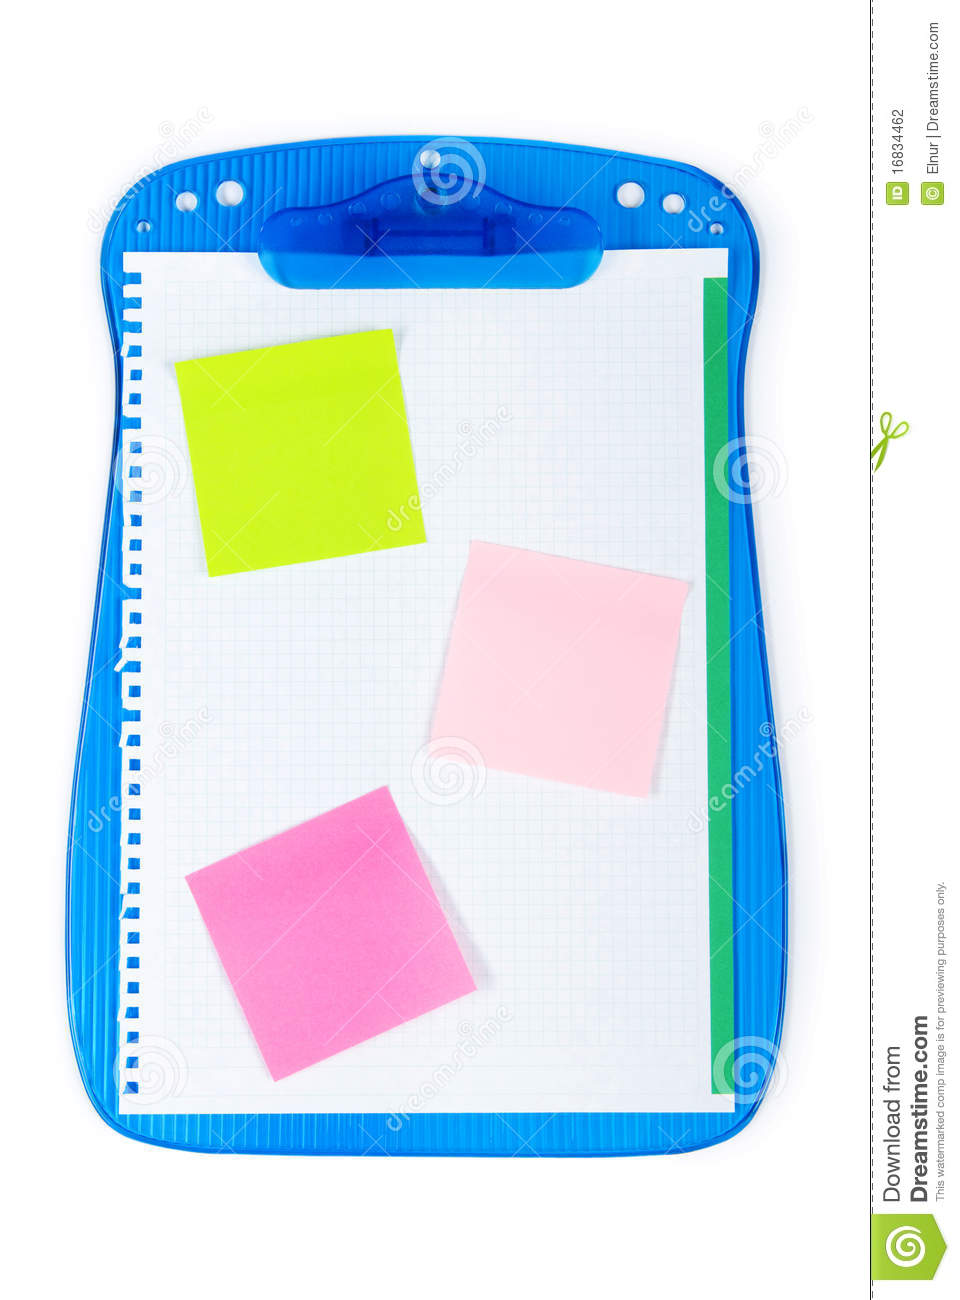 Open Binder With Reminder Notes Stock Photography   Image  16834462